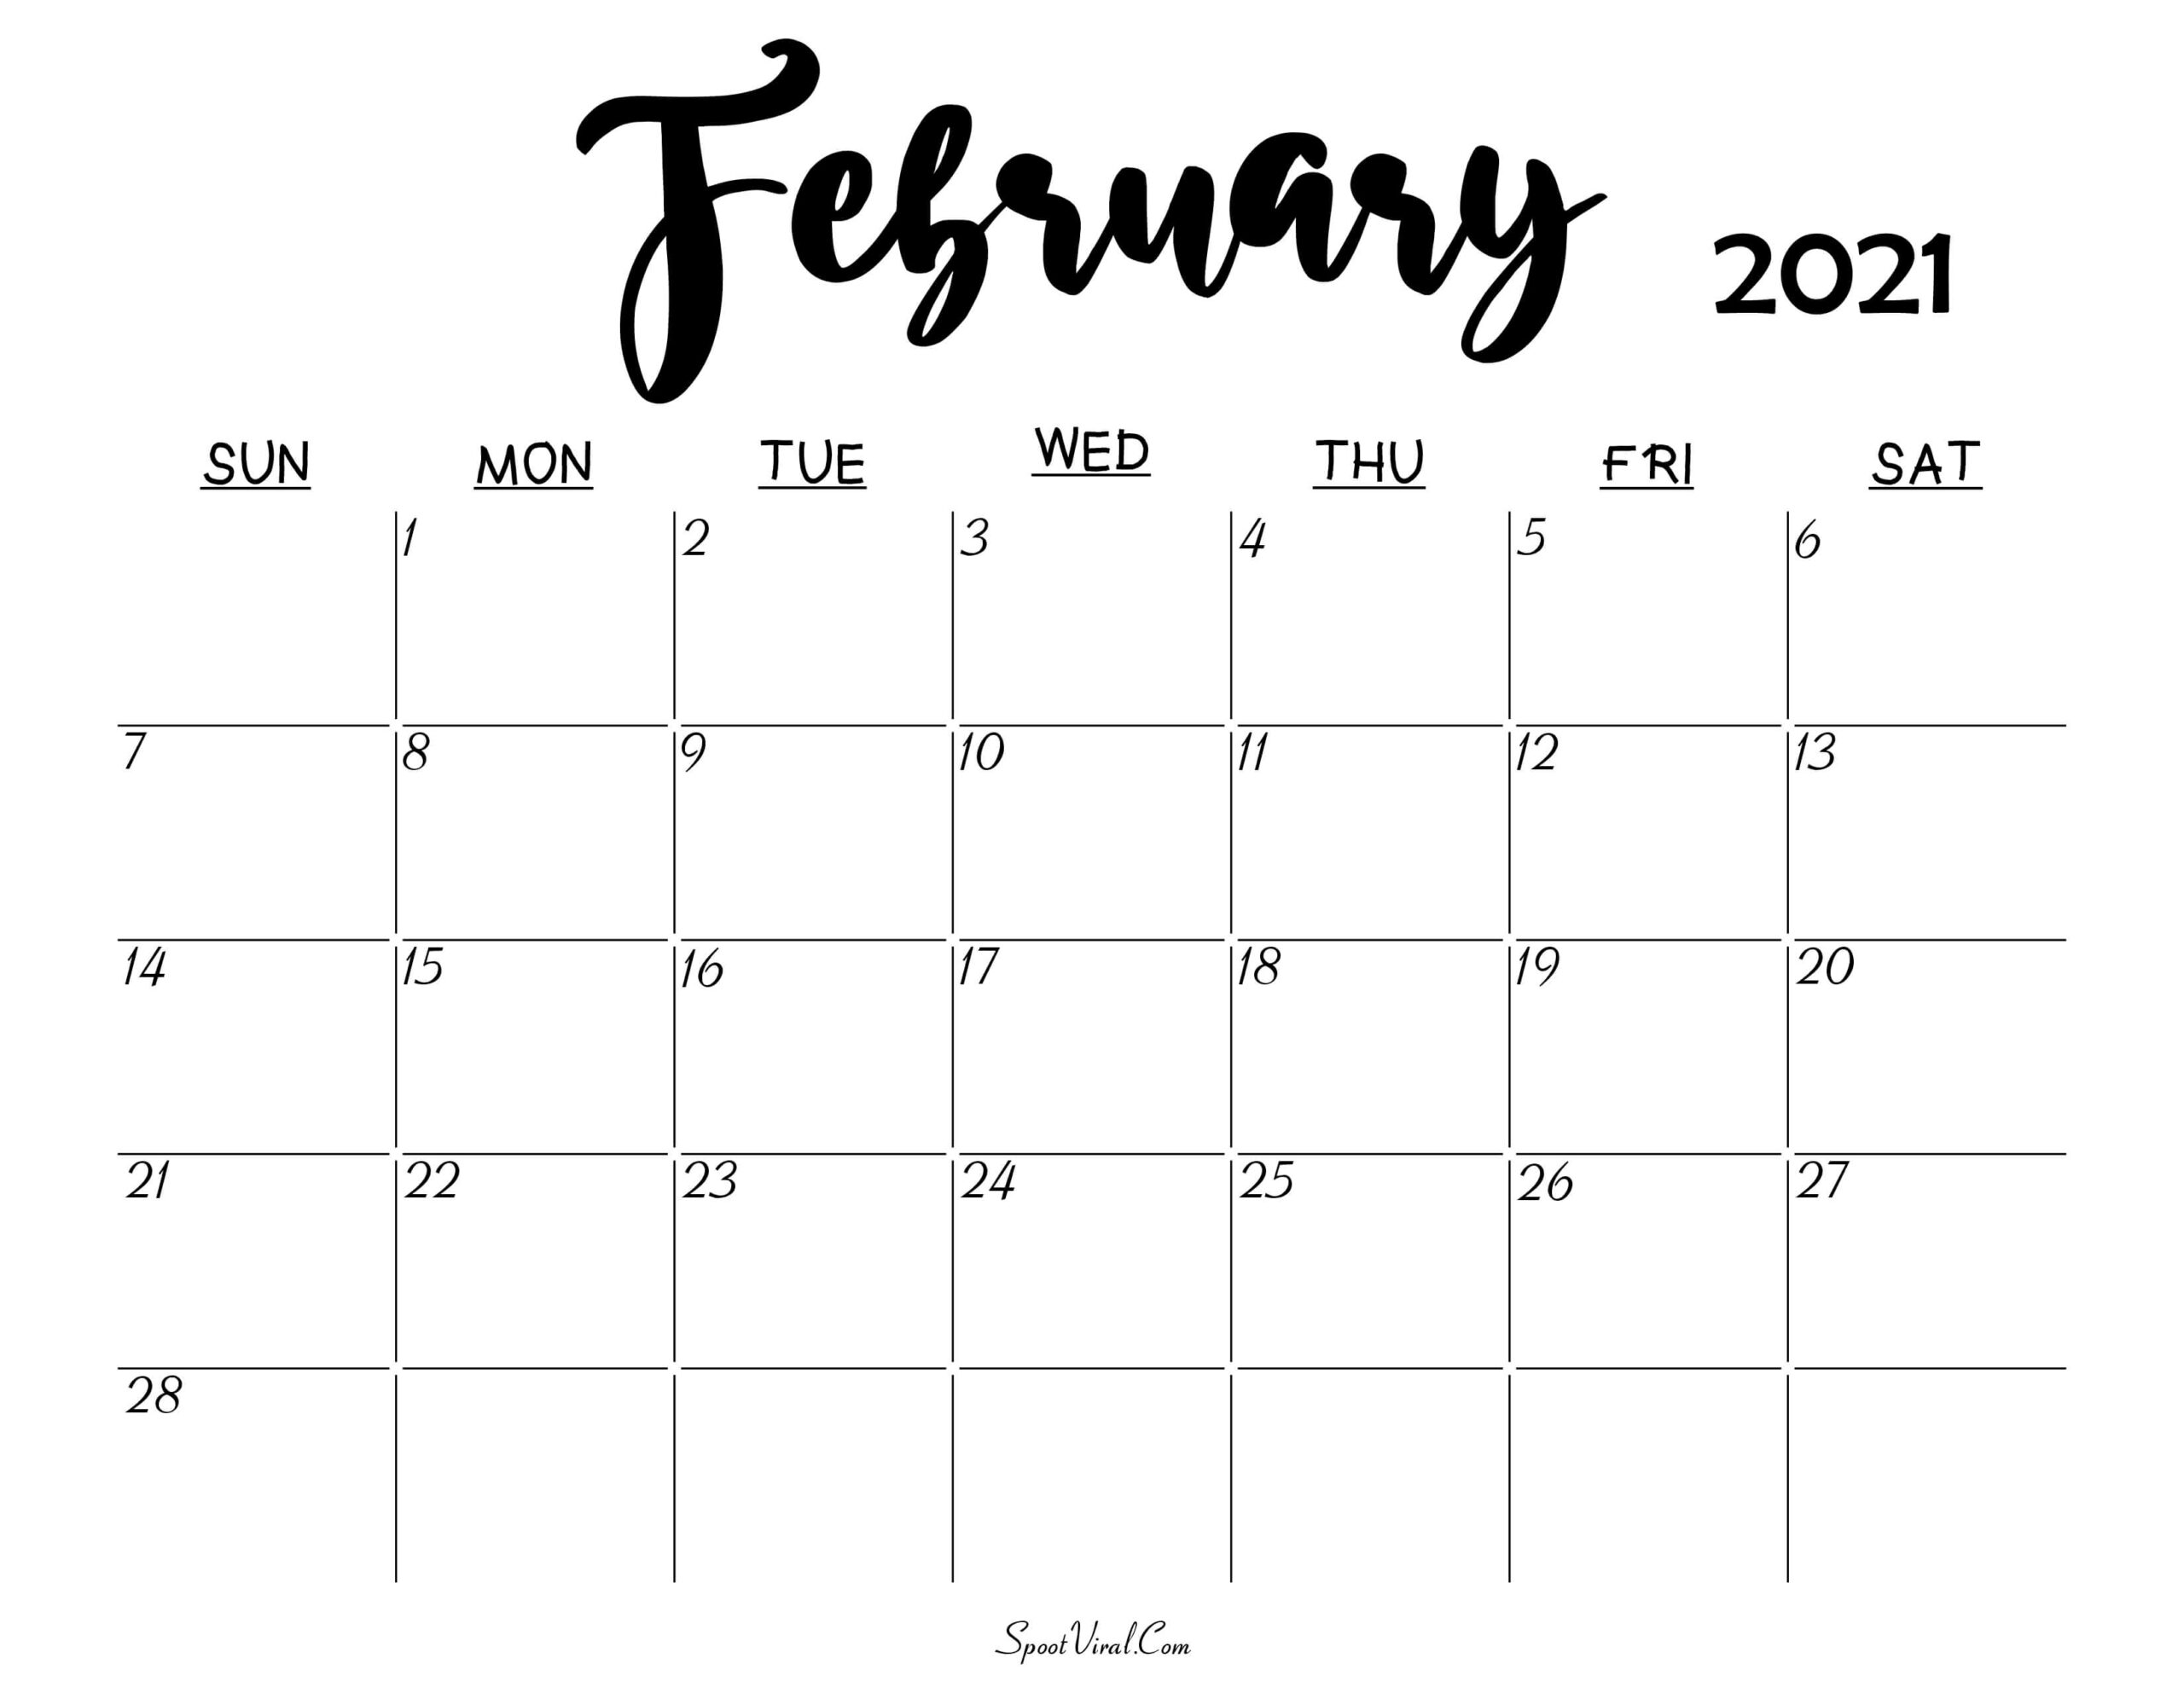 Catch Is February 2021 A Leap Year